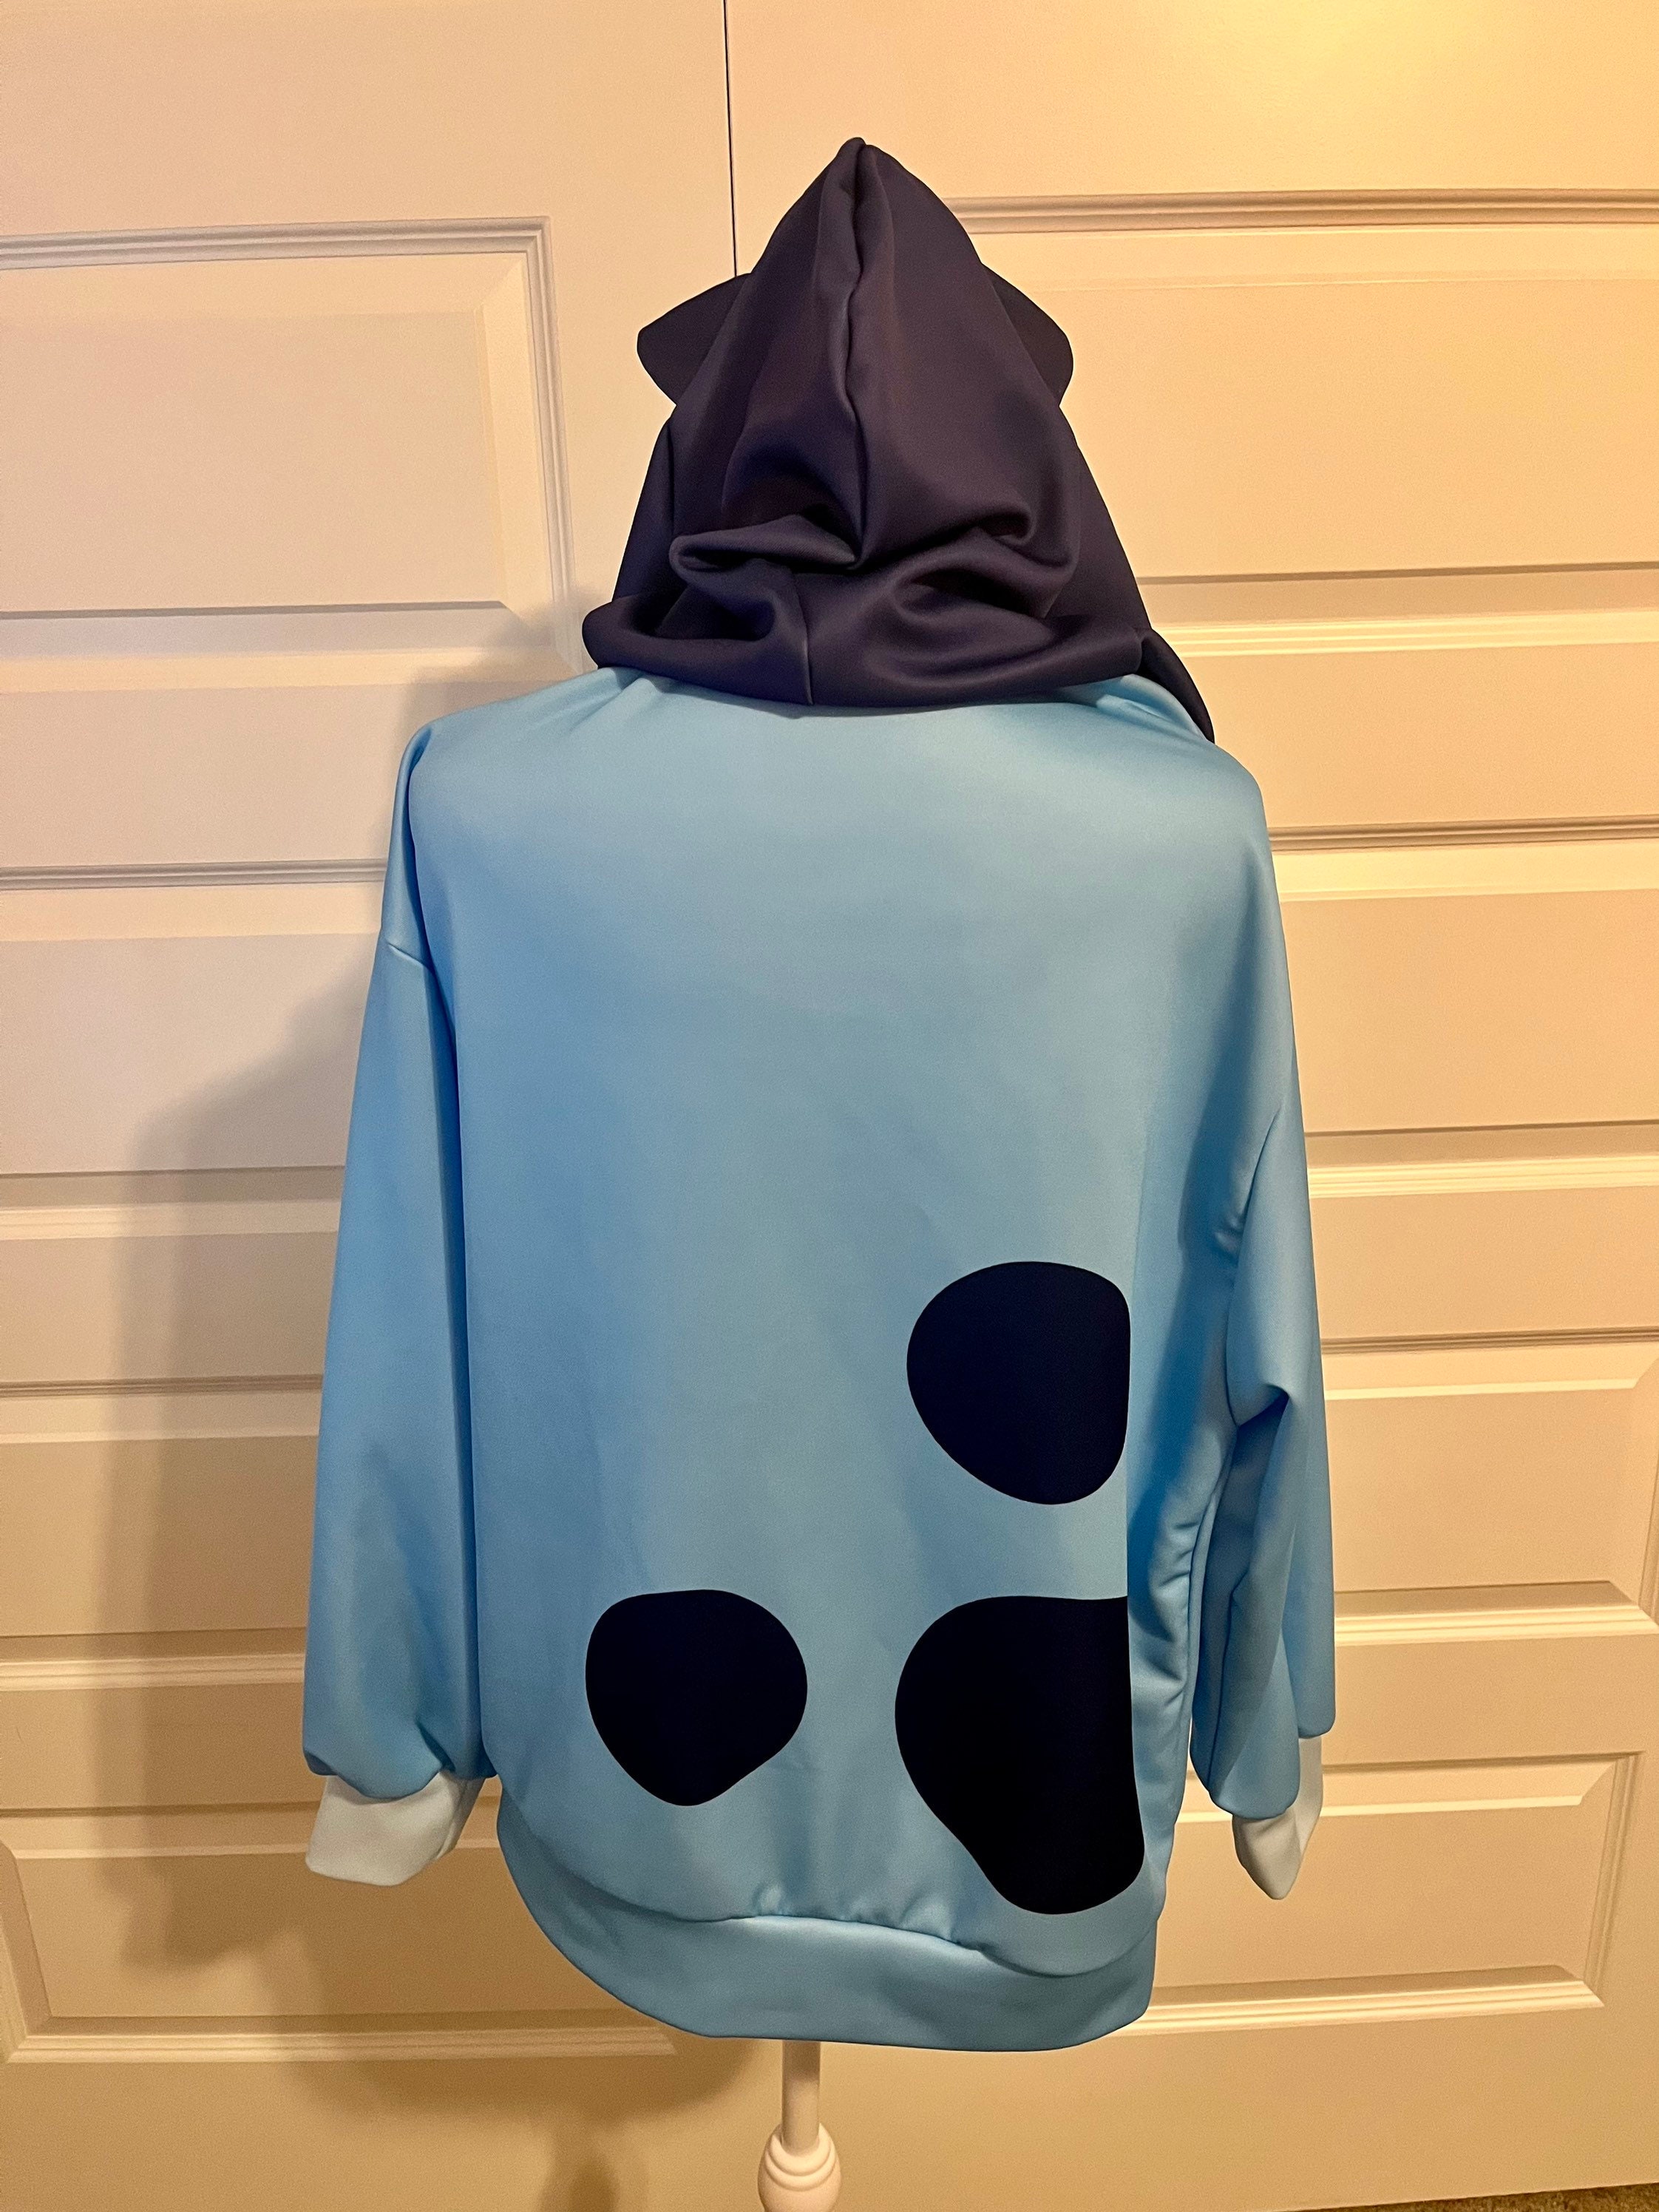 Blue Ful Disney Stitch Hooded Hoodie Travel Neck Pillow